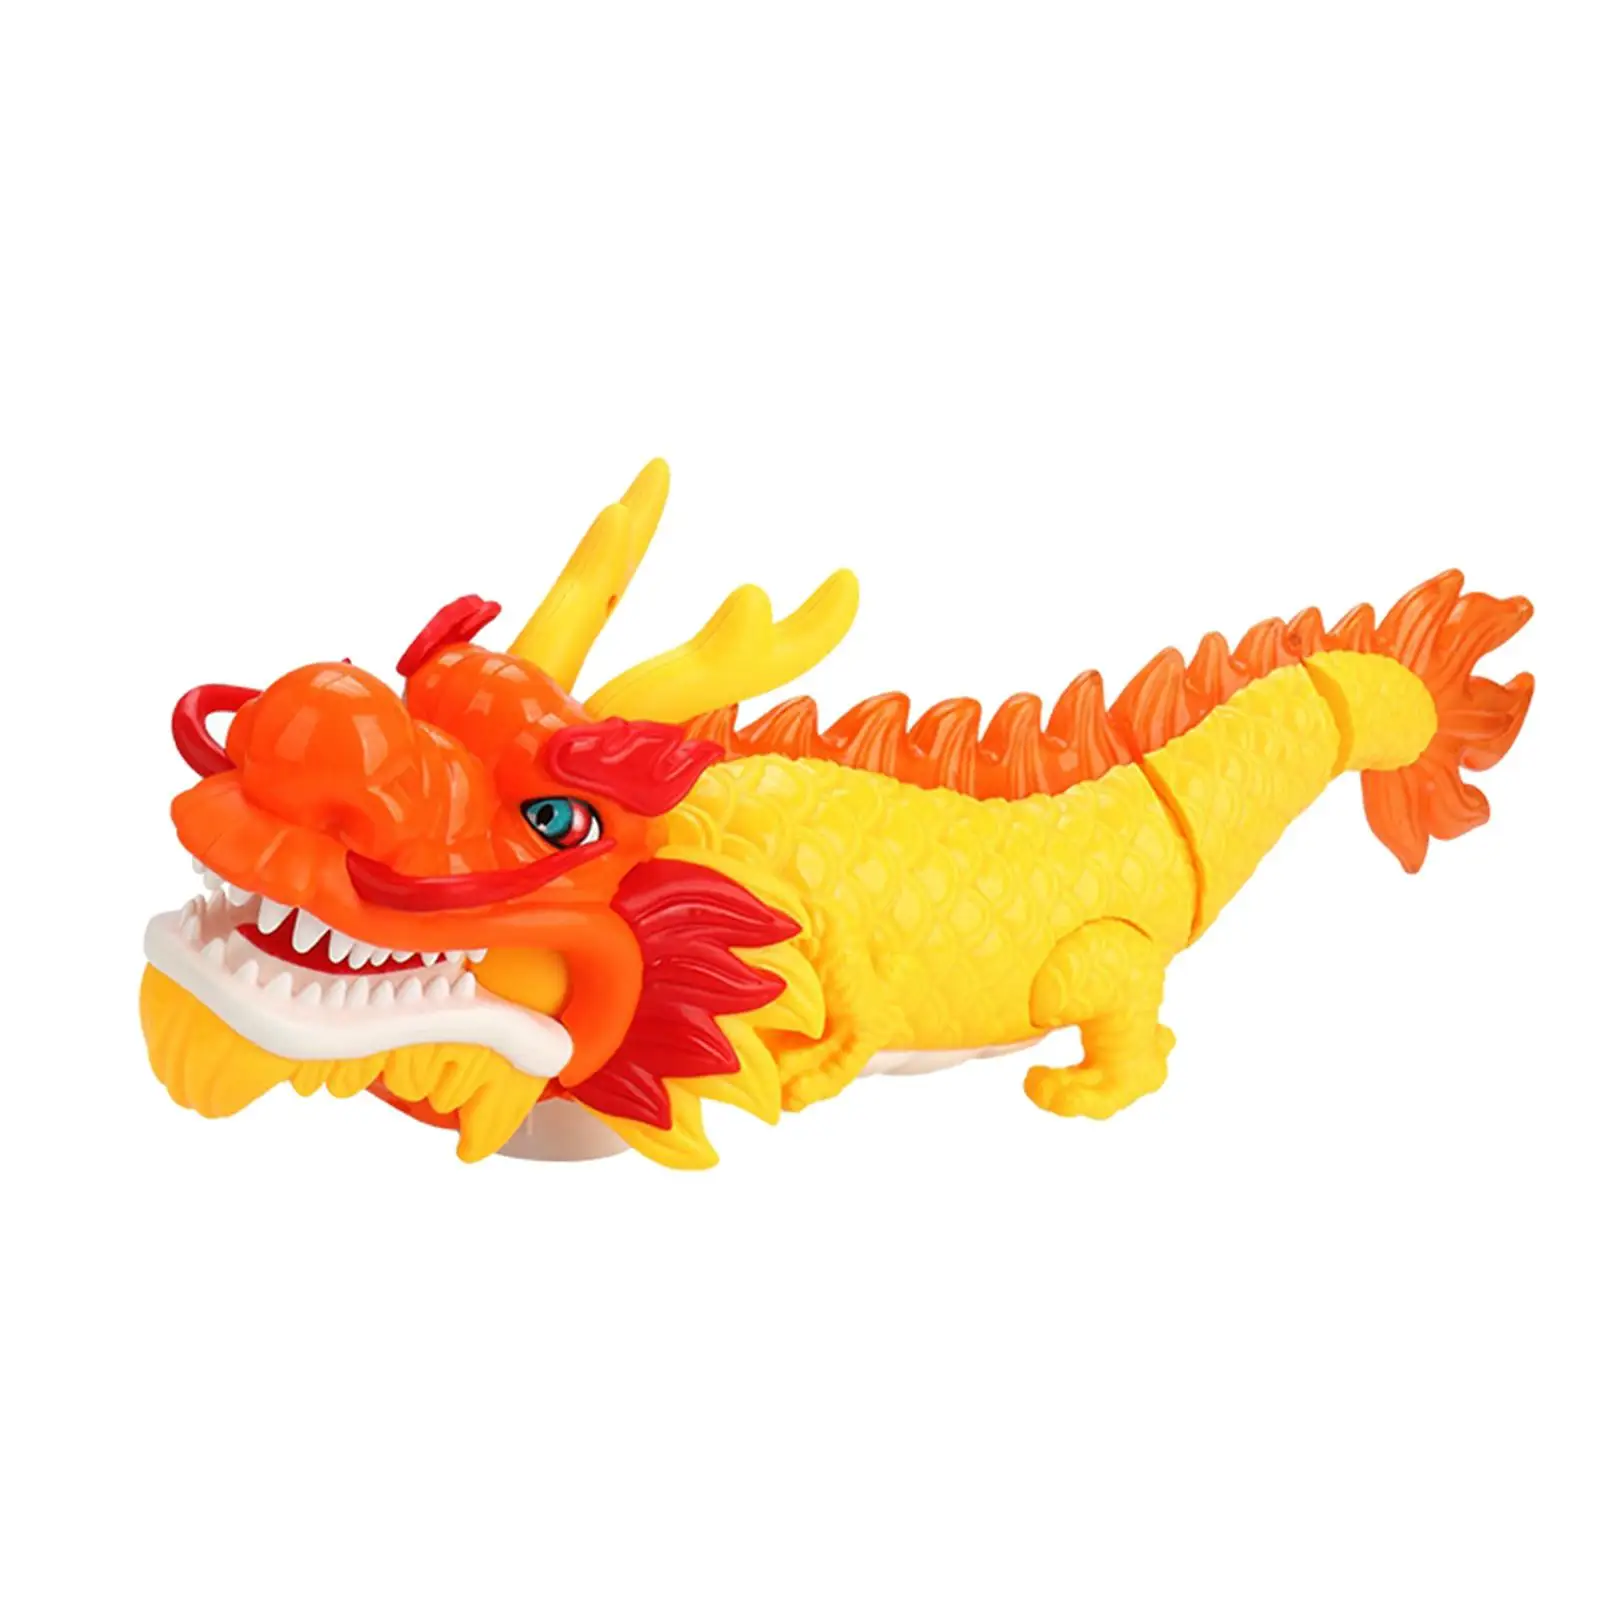 Eletric Dragon Toy Gifts Dragon Toy Gifts Creative High Simulation Crawling Toy for Girls Adults Boys 4 5 6 7 8 9 Year Olds Kid